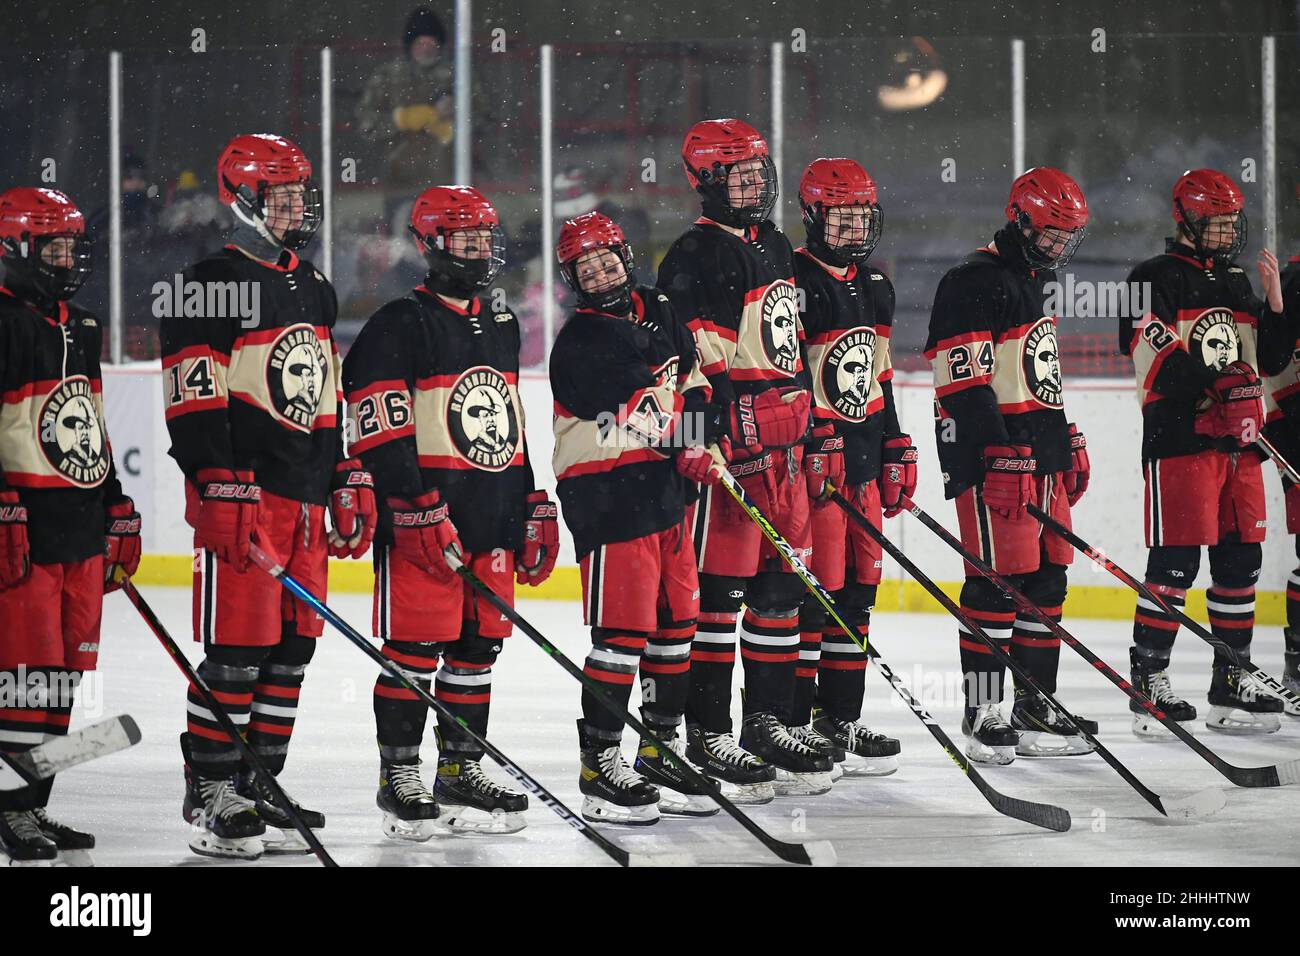 Grand Forks Red River Roughriders line up before their game against the Bismarck High Demons during the 3rd annual Hockey Day North Dakota outdoor hockey event in Jamestown, ND. Youth, high school and college hockey teams from around North Dakota competed over two days. By Russell Hons/CSM Stock Photo